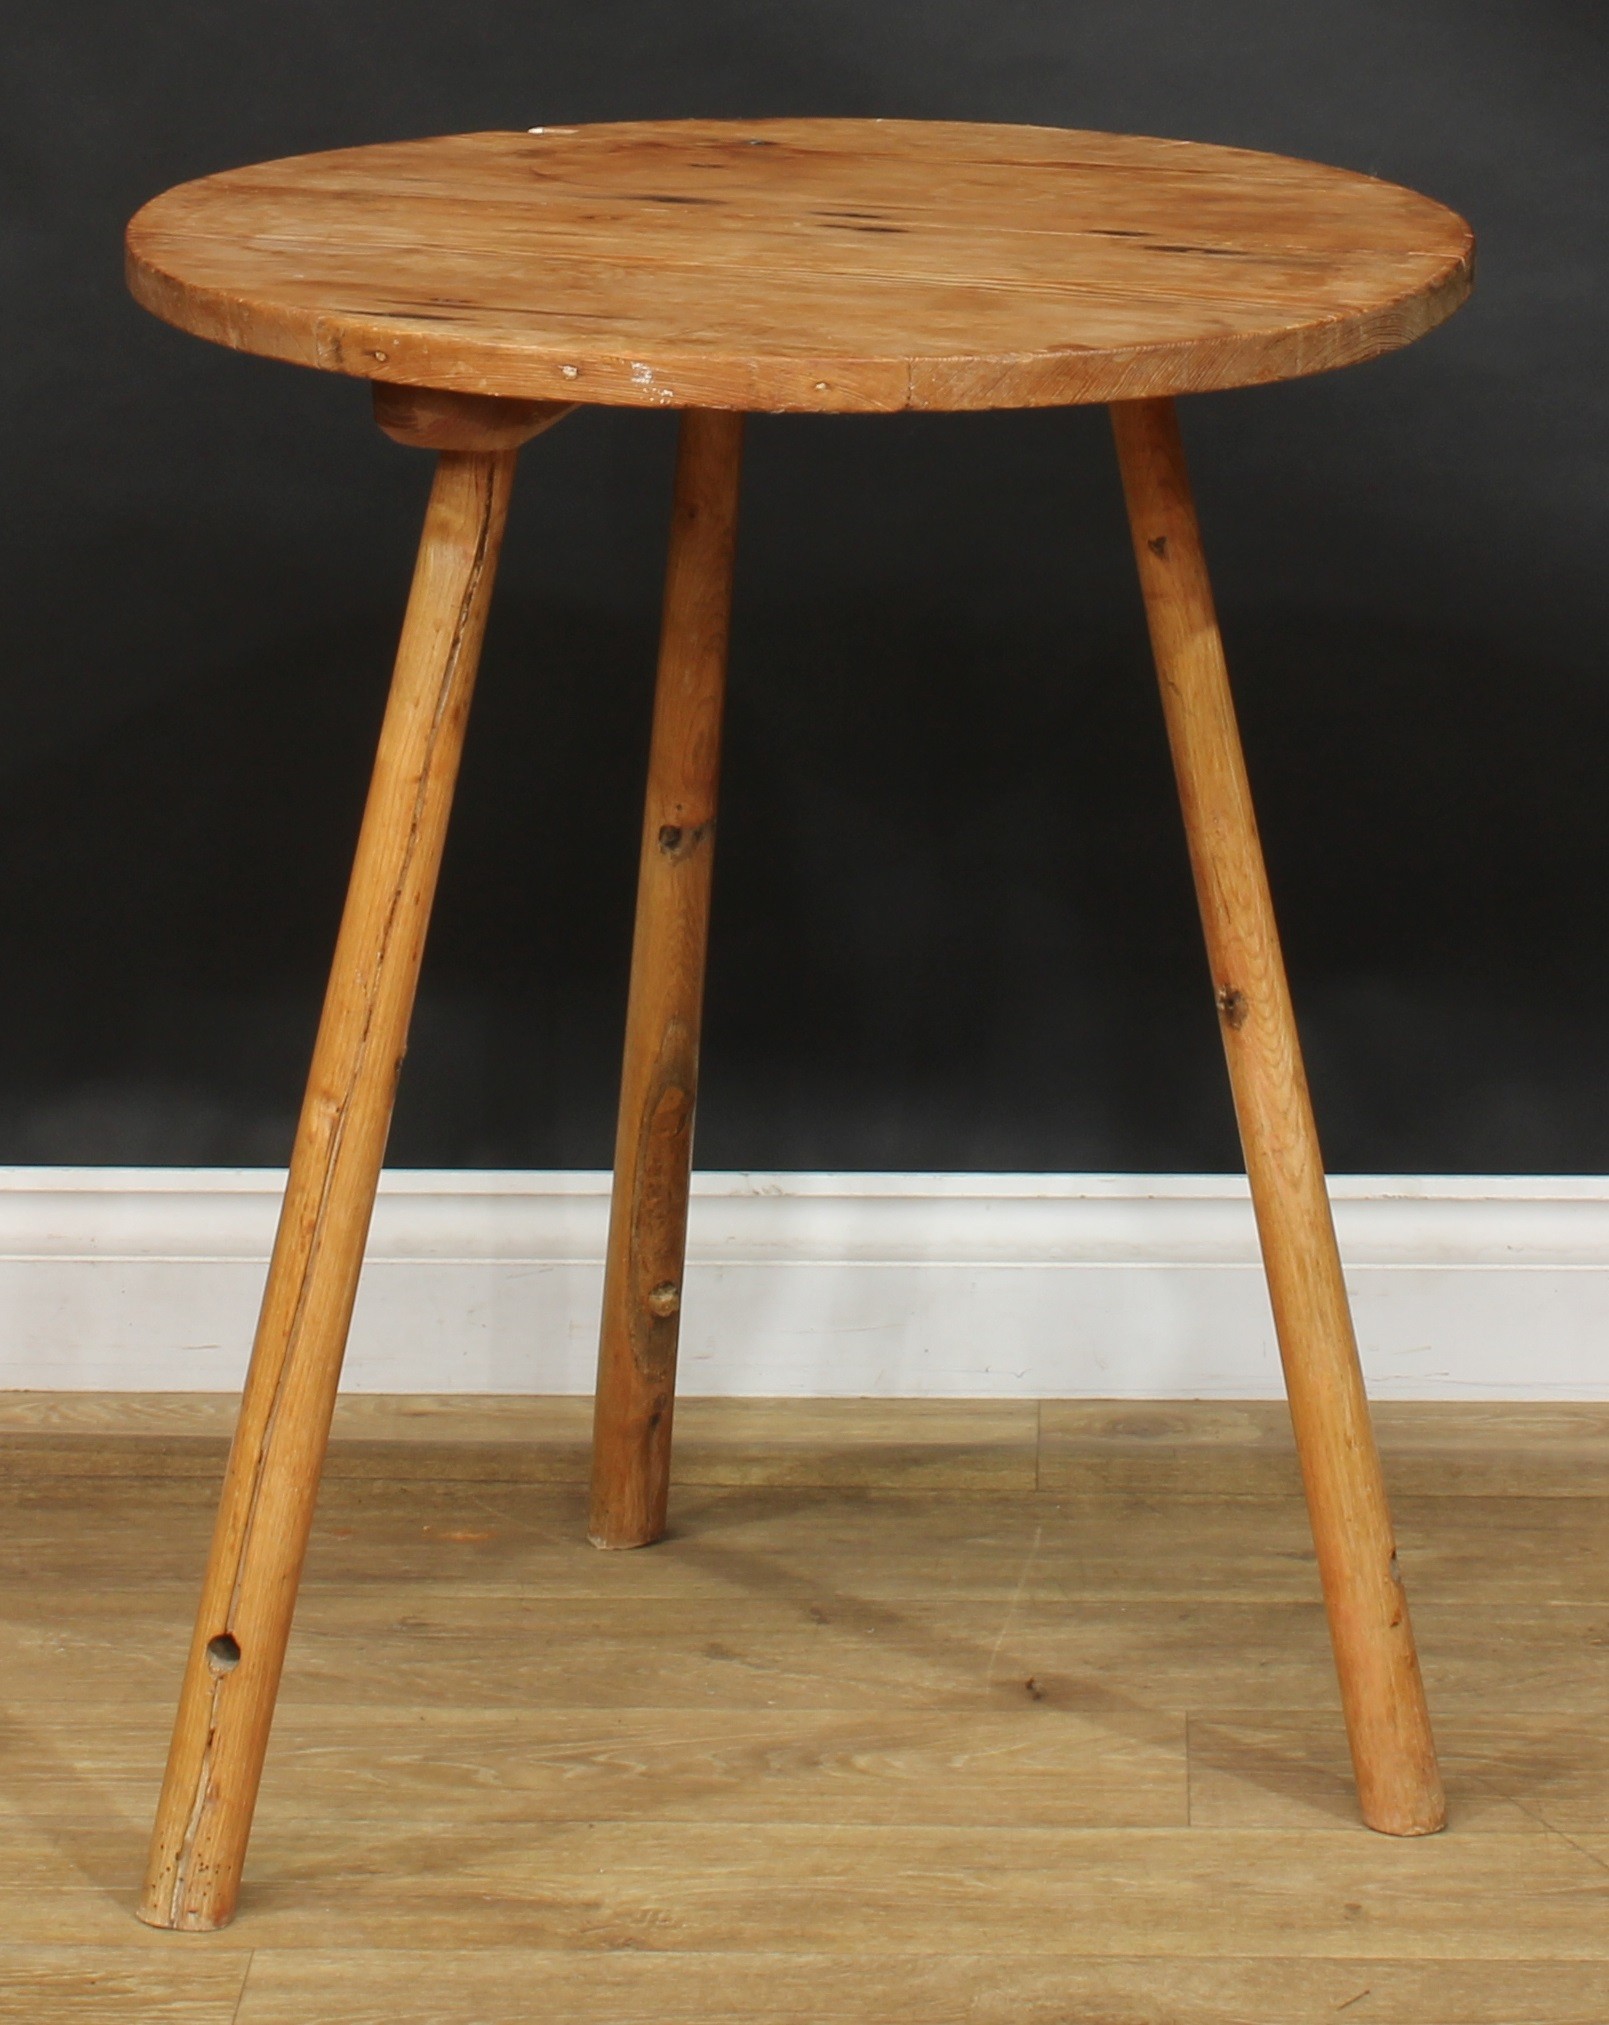 A 19th century pine and ash cricket table, circular top, 73cm high, 61cm diameter - Image 2 of 4